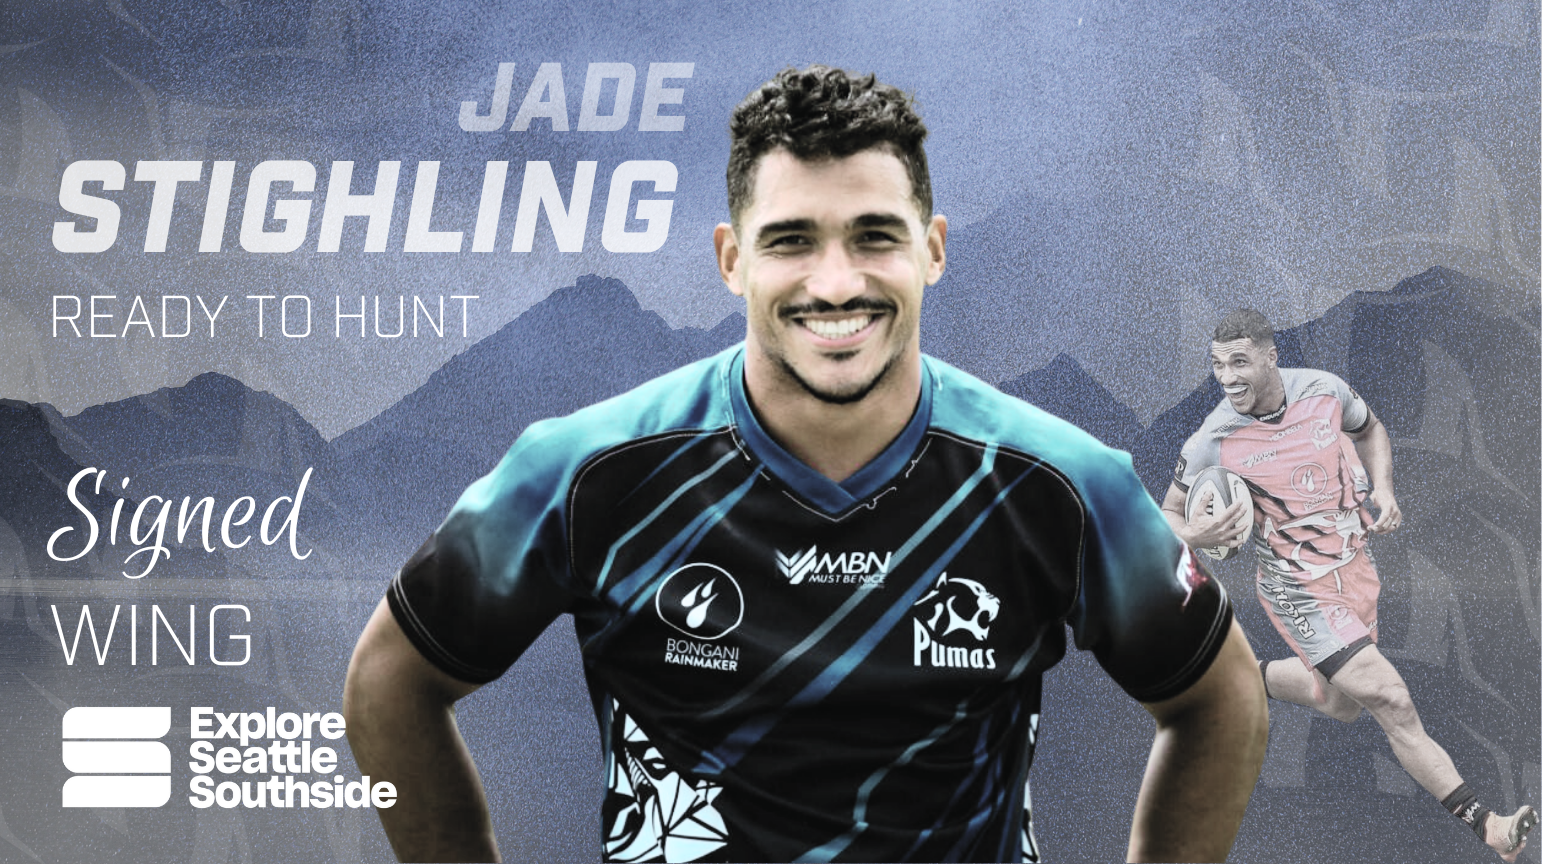 SEAWOLVES RUGBY WELCOMES JADE STIGHLING TO THE POD